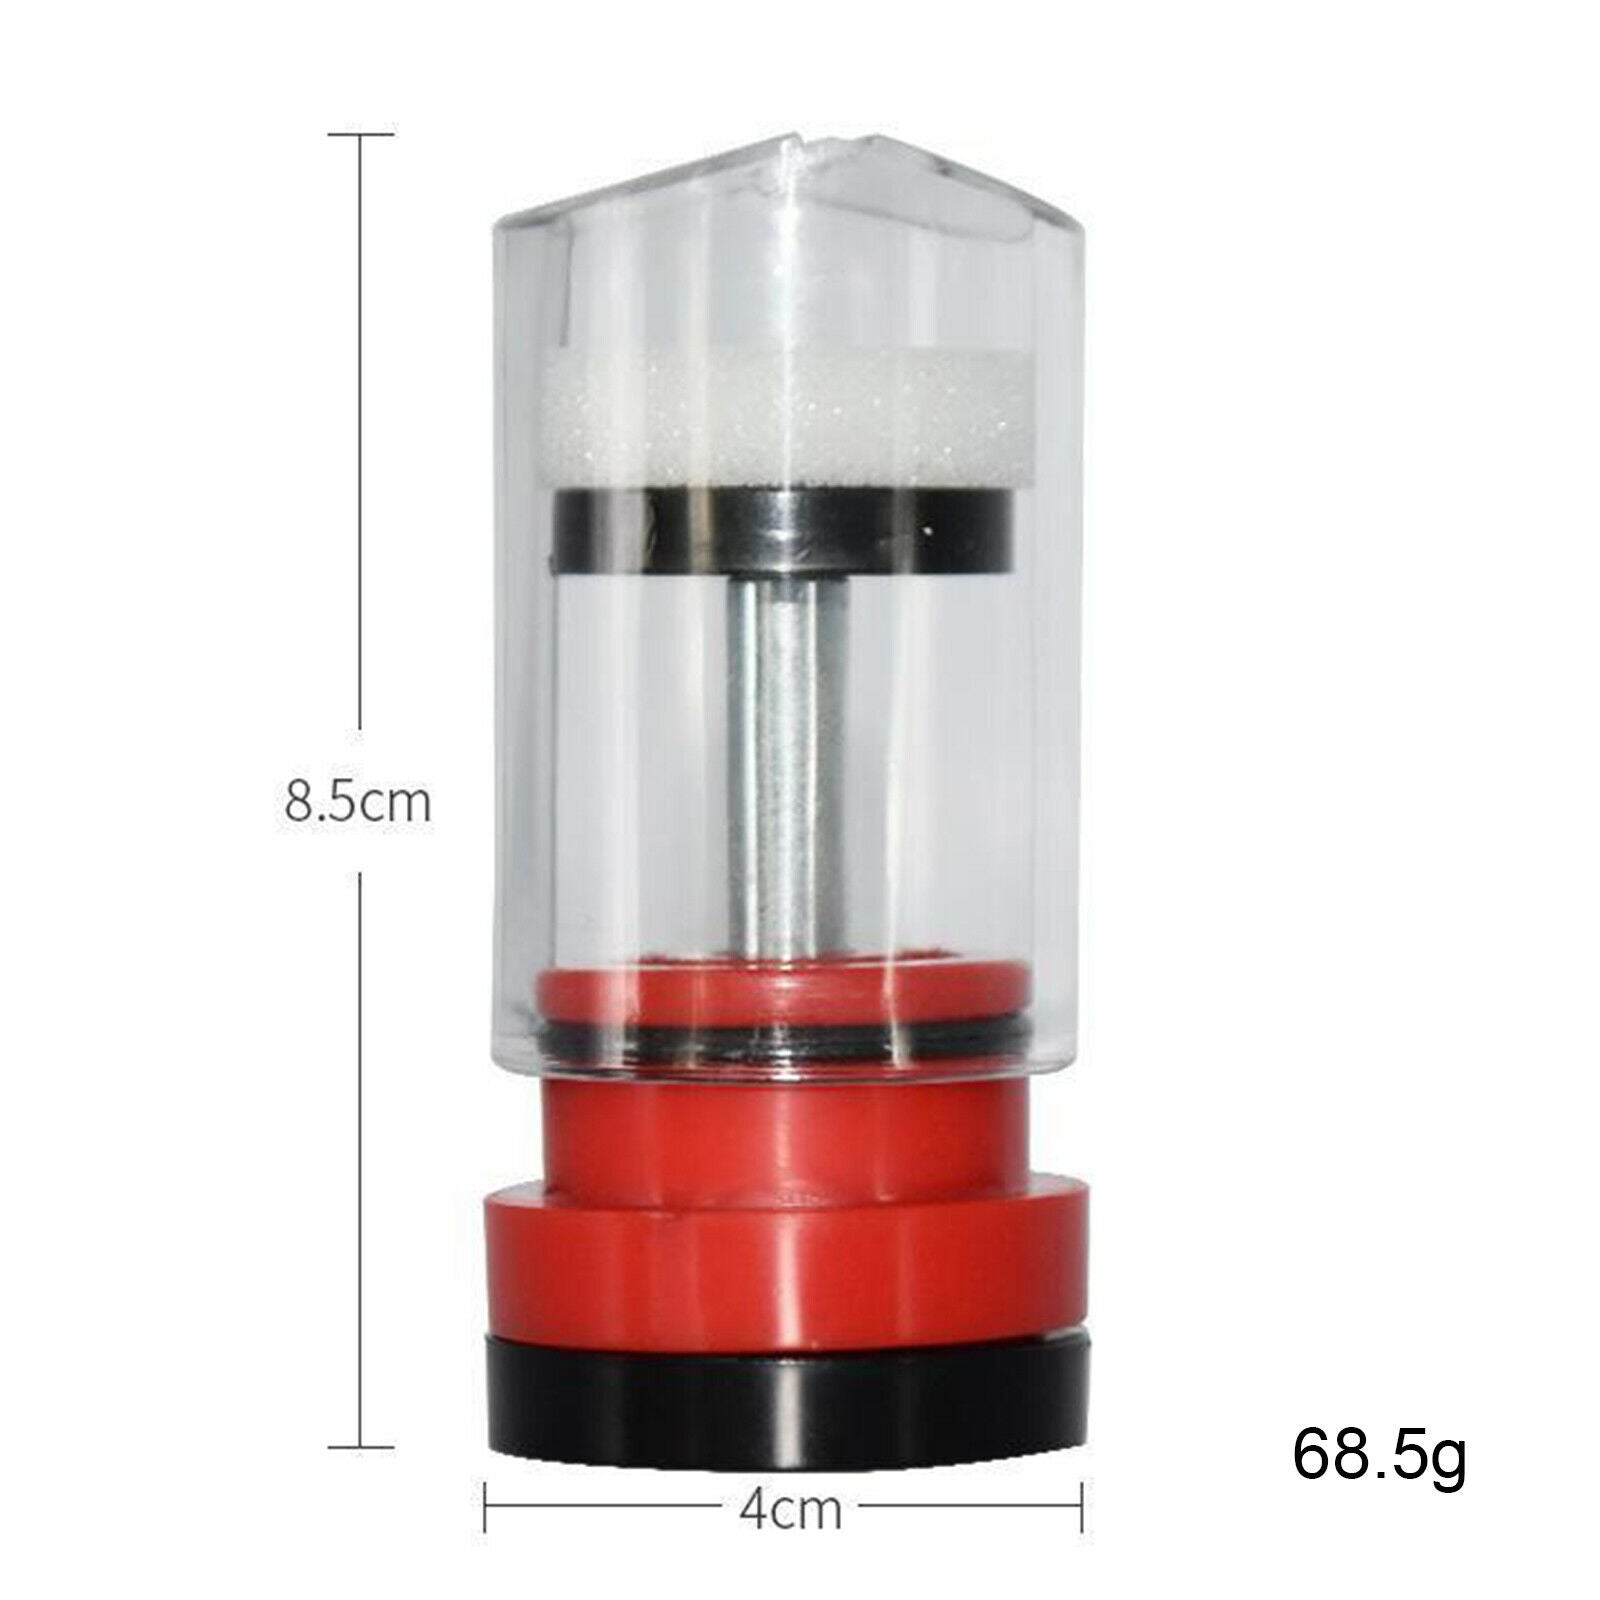 One-Handed Bee Queen Marker Marking Cage Bottle Tool, Unique Design High-Quality